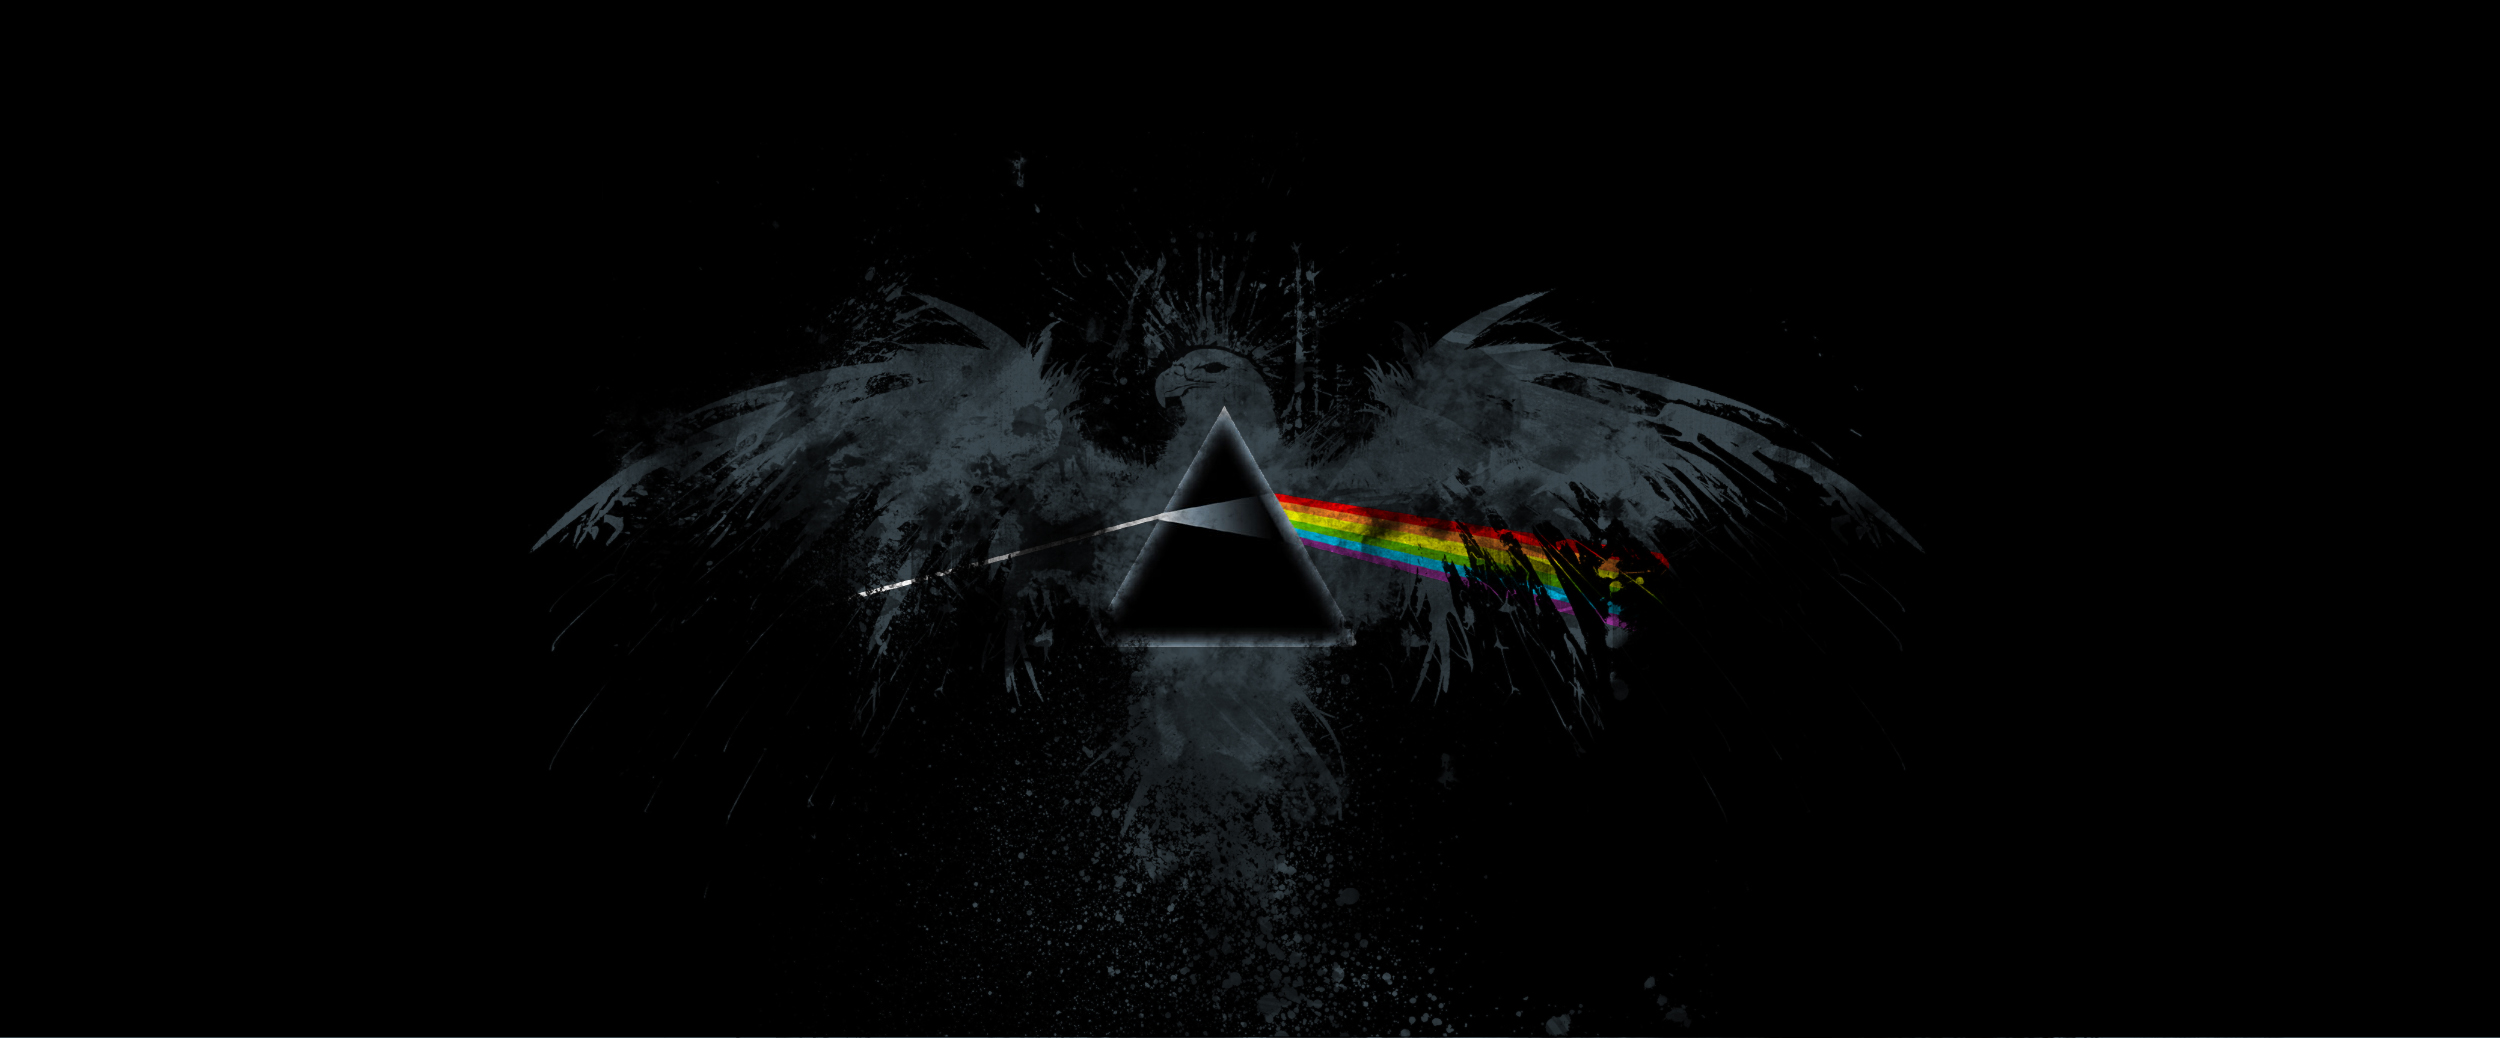 Related to Pink Floyd Wallpapers Full HD wallpaper search